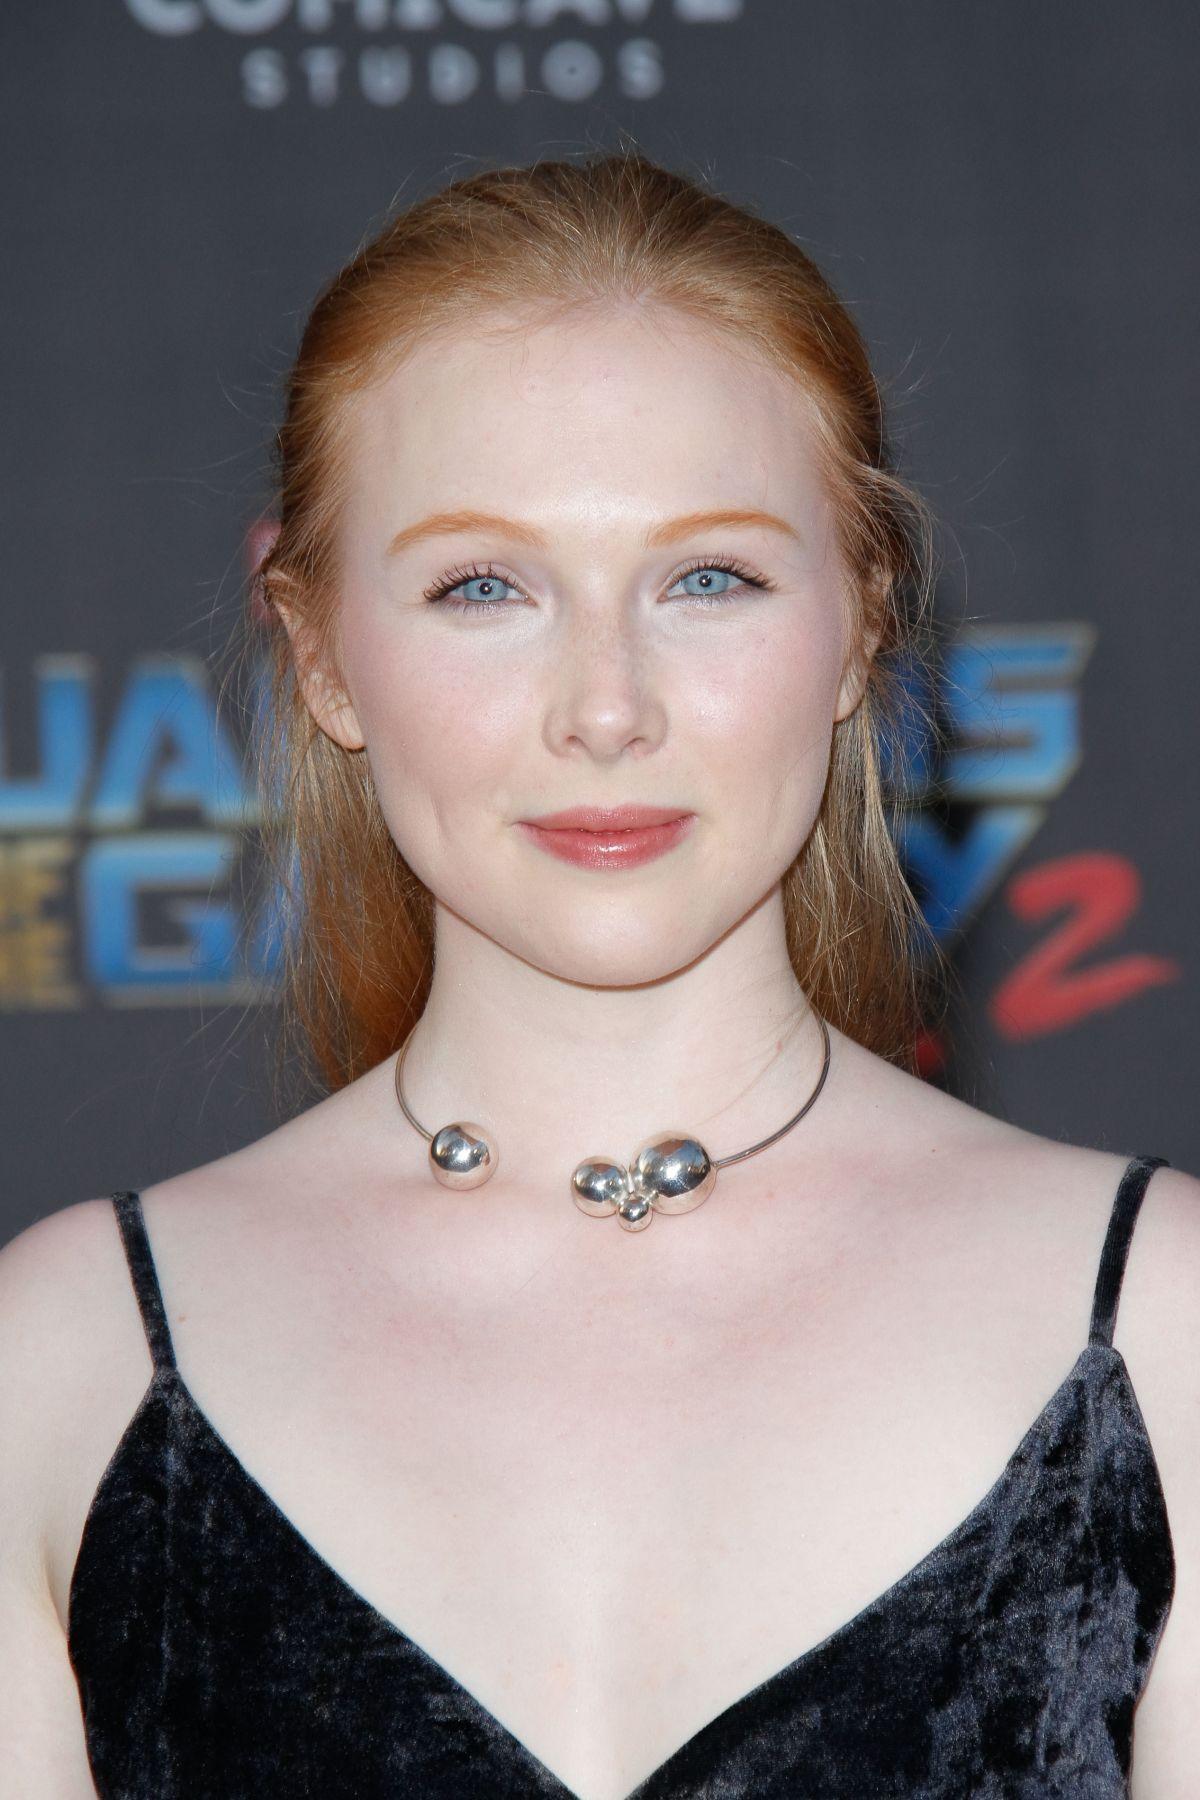 70+ Hot Pictures Of Molly C. Quinn Are God’s Gift For Her Die Hard Fans 109